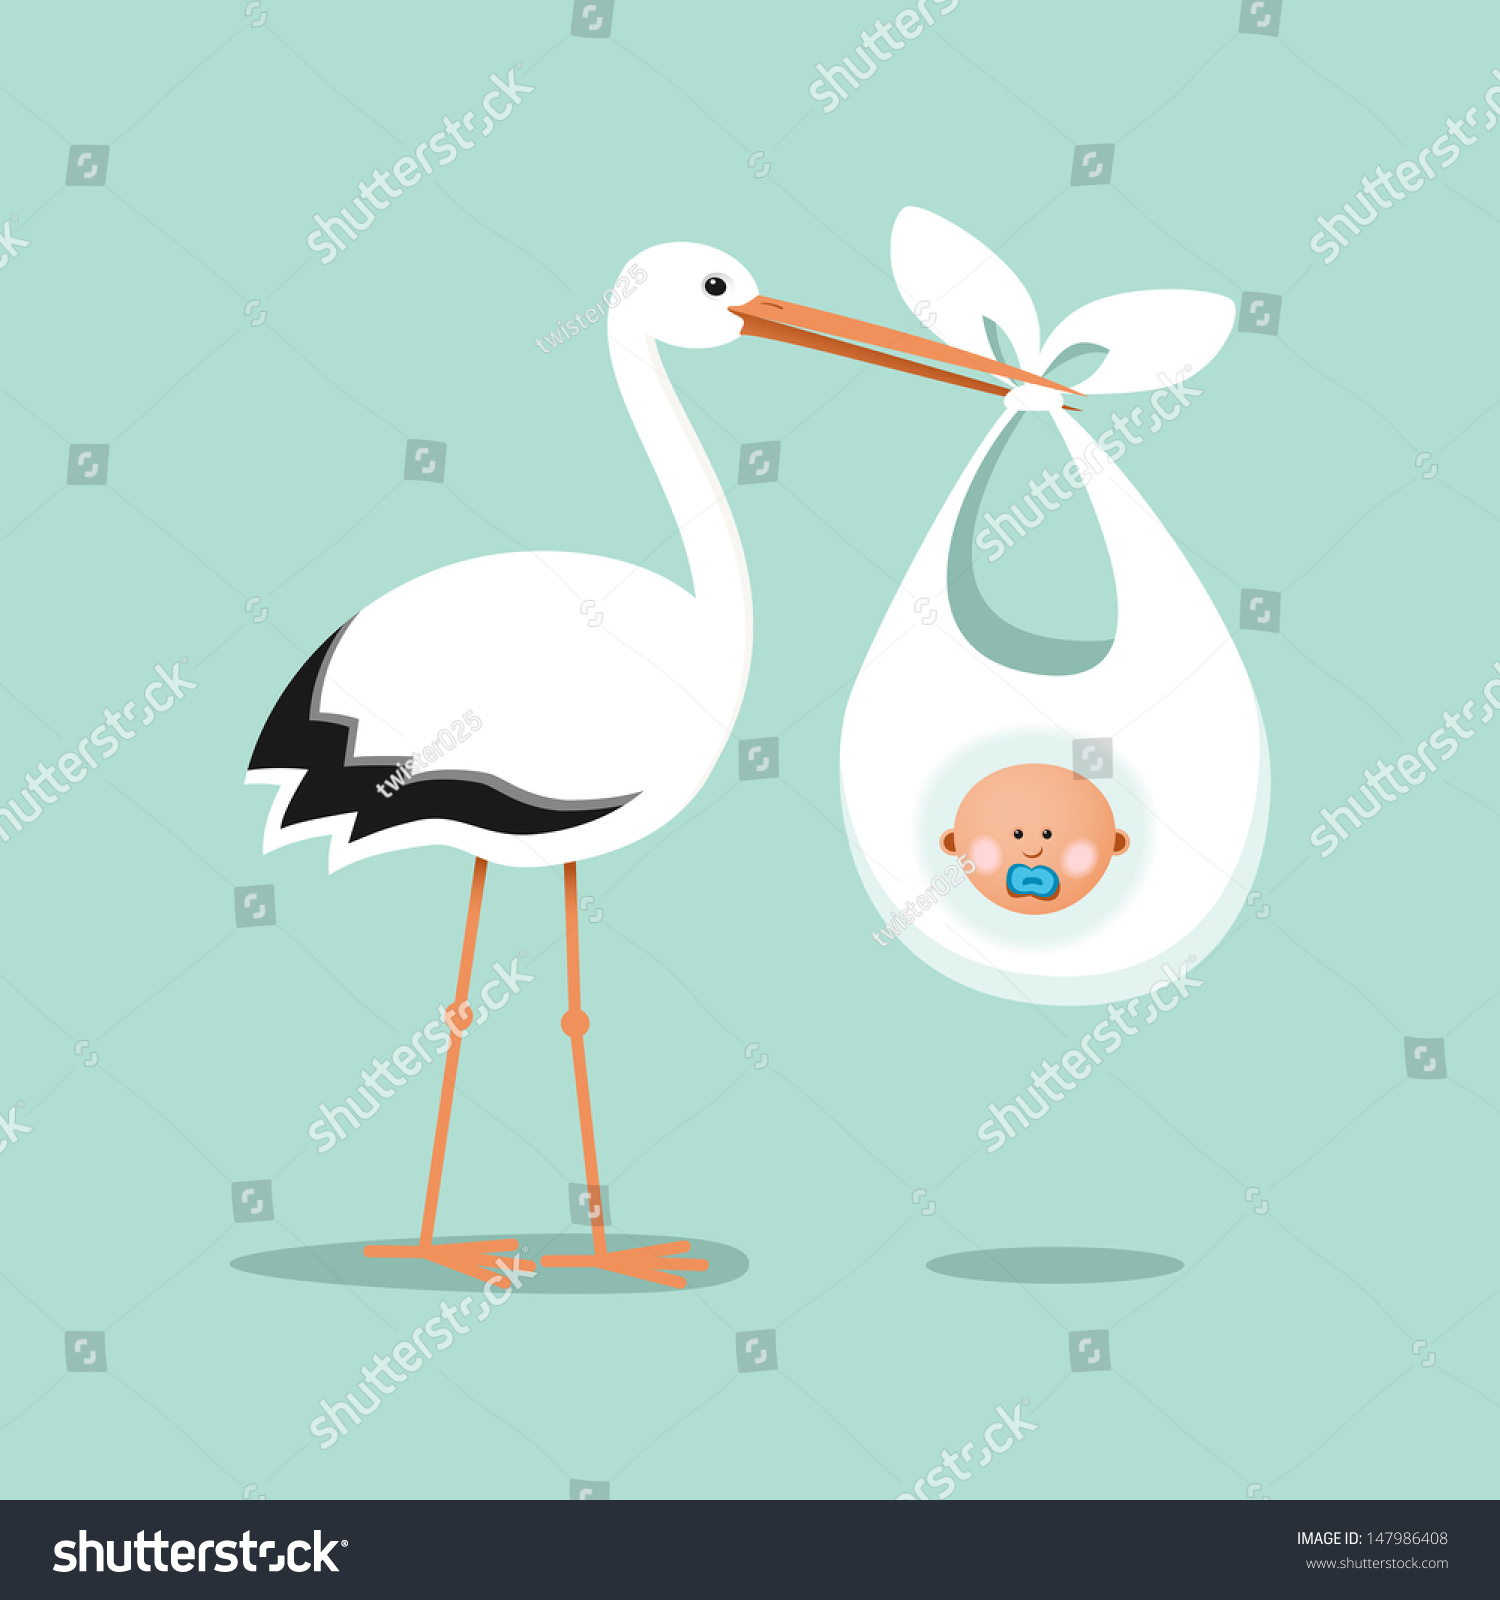 White Stork Carrying A Cute Baby. Delivery Of A Newborn Baby Stock ...